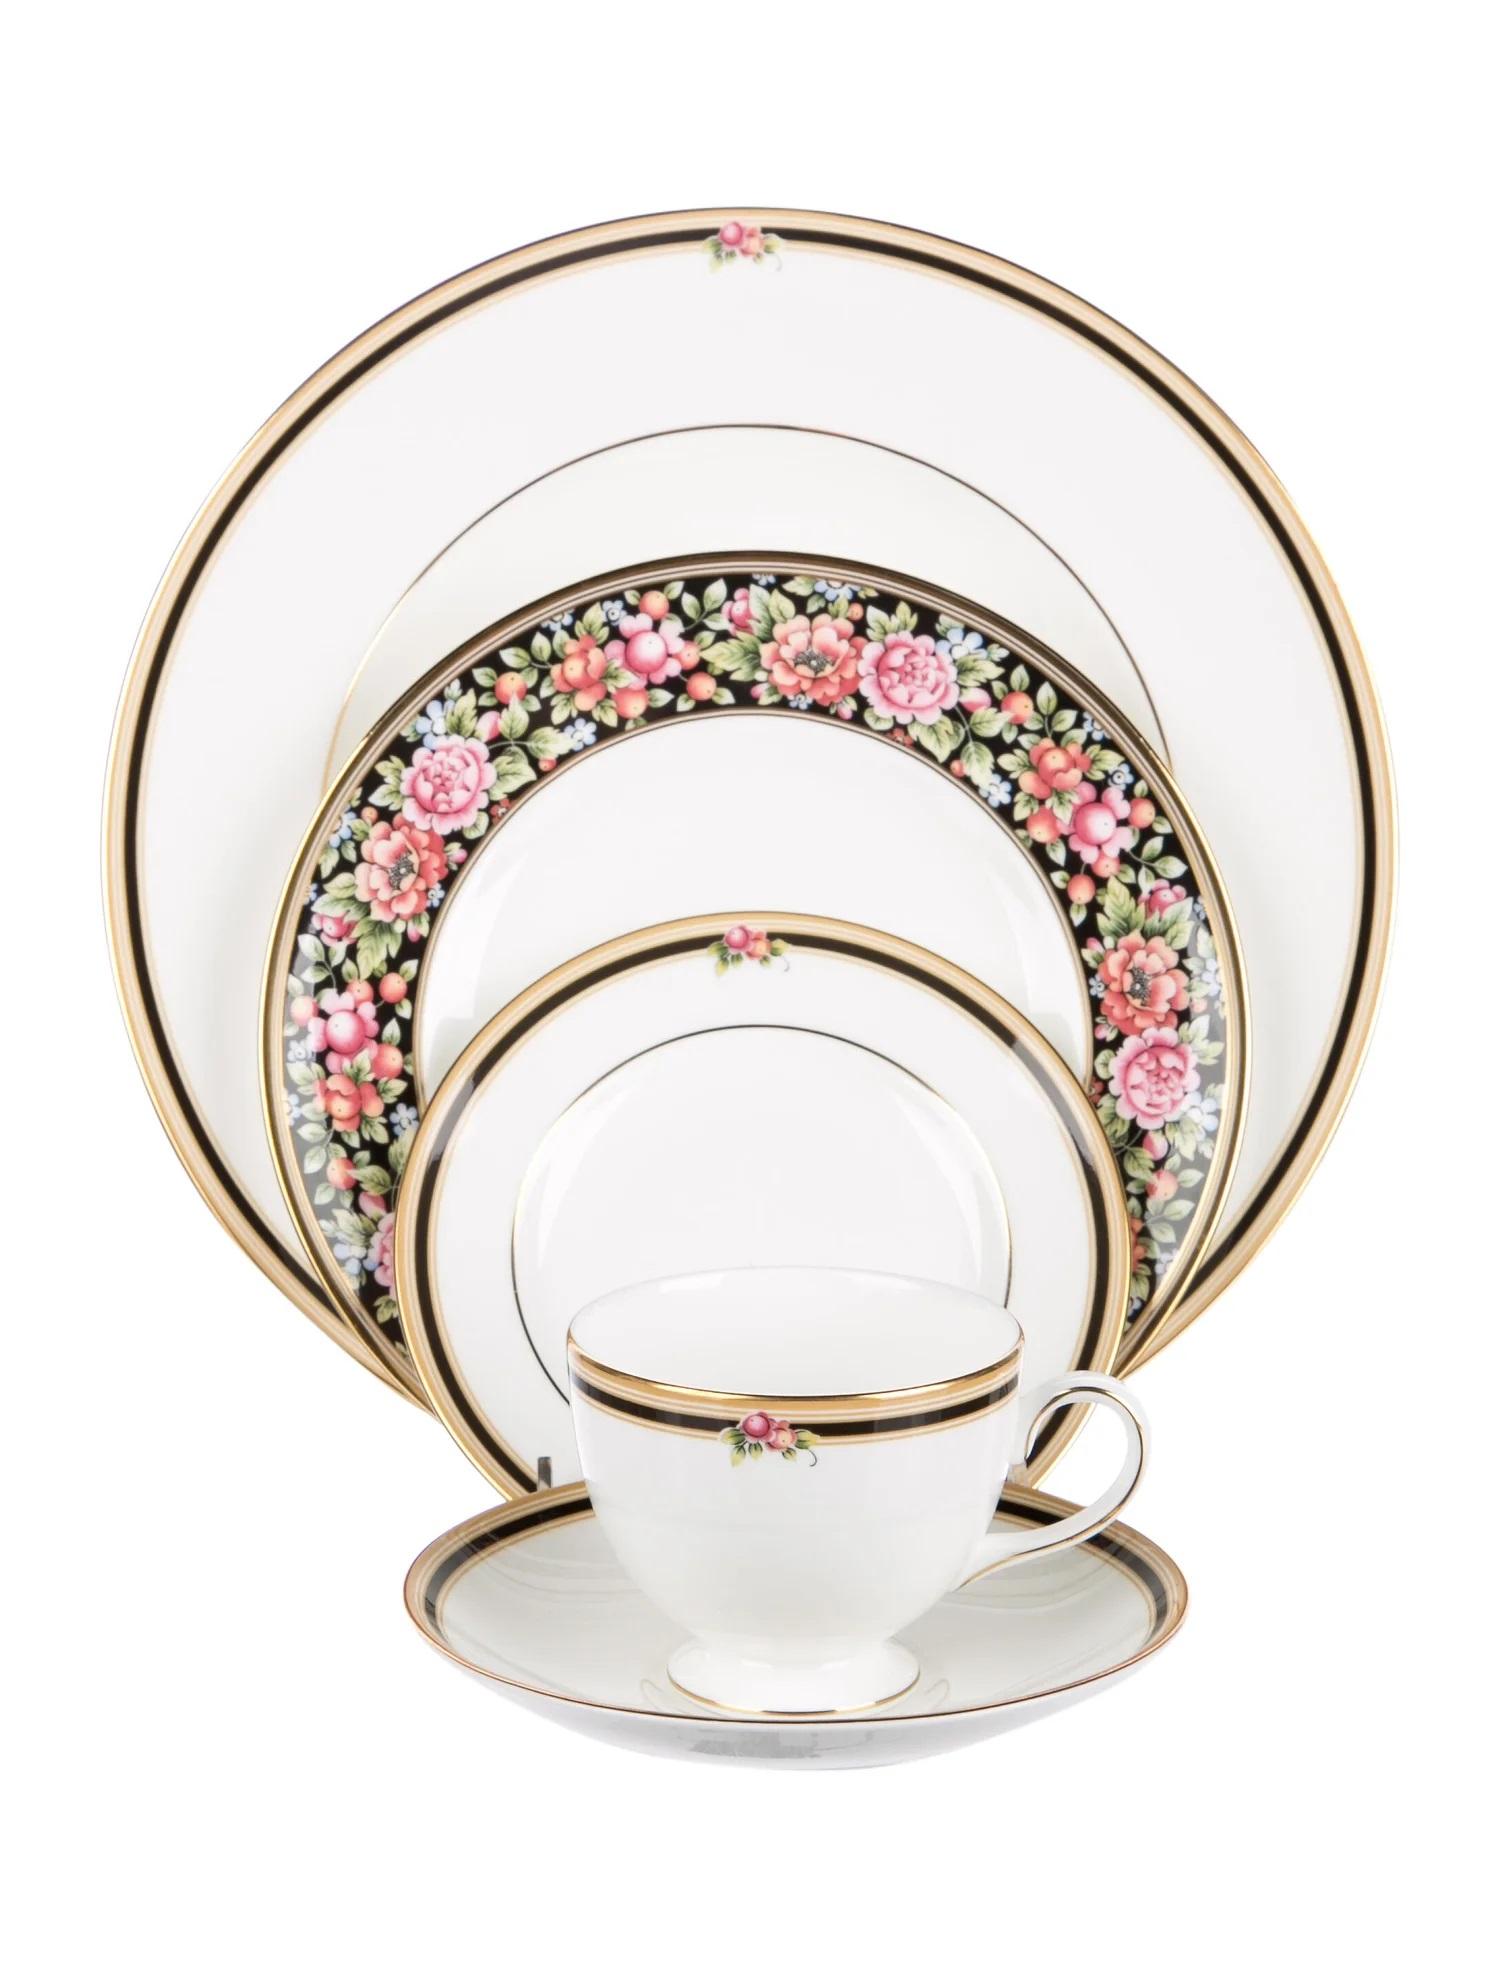 A set of 16 place settings (a total of 80 pieces) in the Clio pattern by Wedgwood.

Features colors of bone, black and gold with floral motif at rims, gilt trim throughout and brand stamp at undersides. 

Made in England; circa 1990. Out if